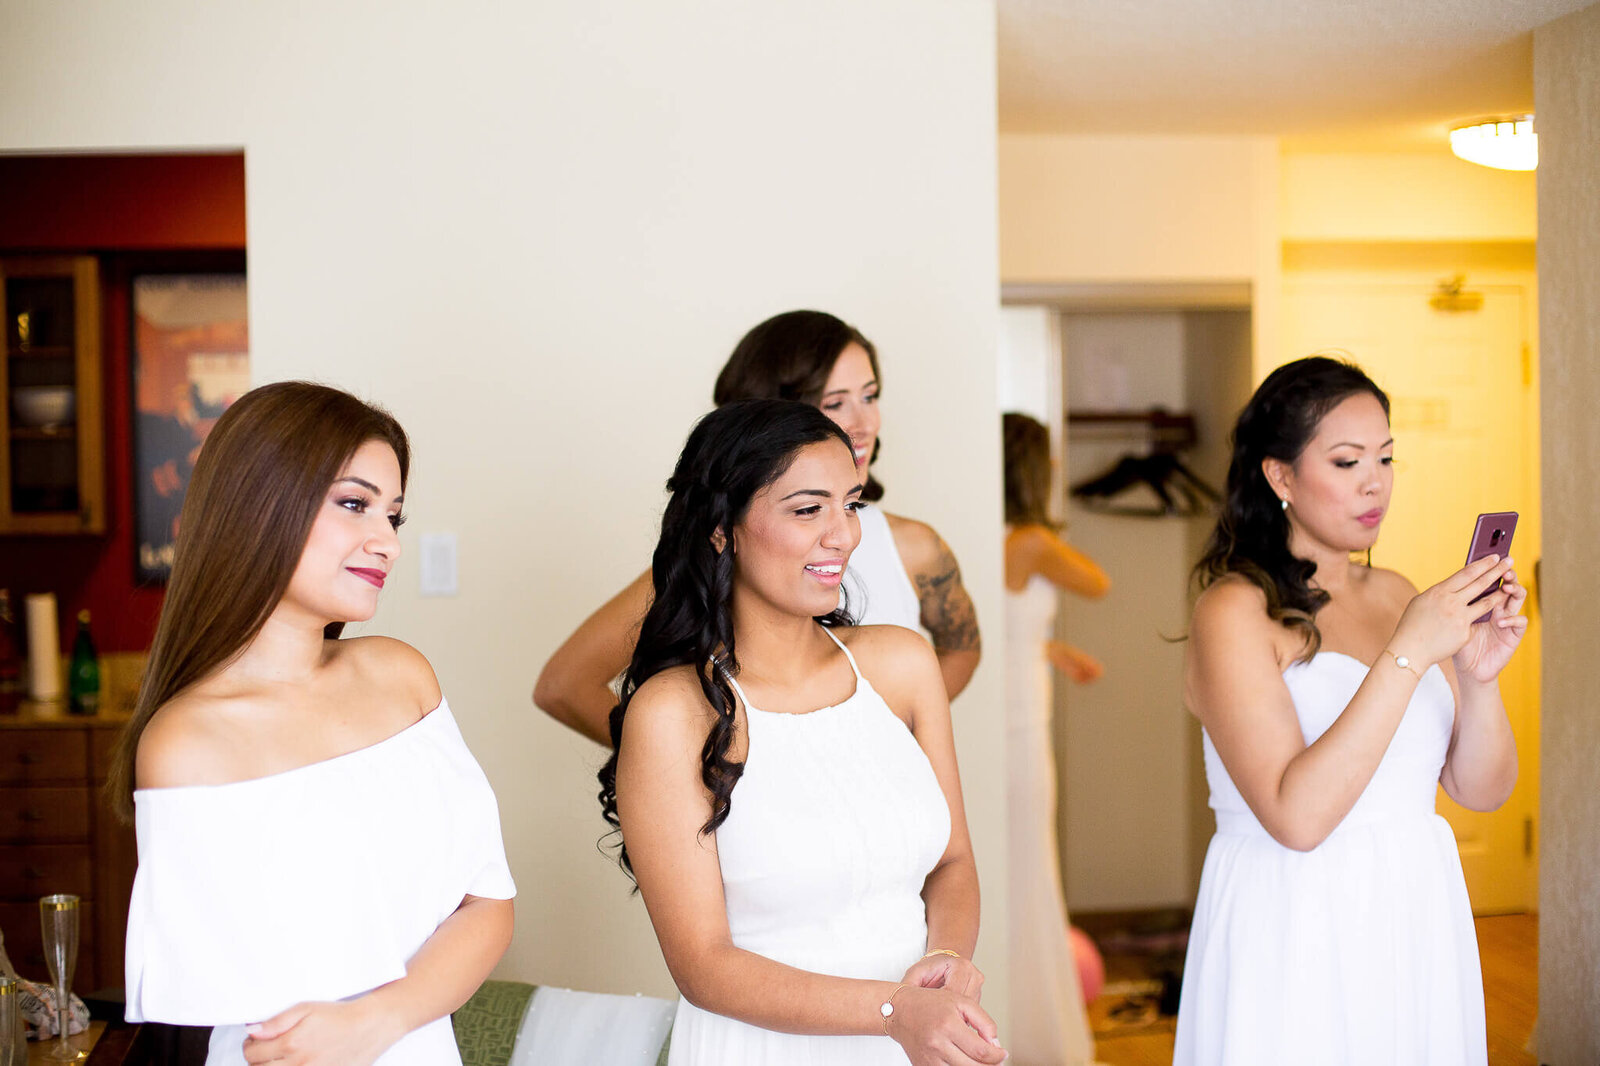 Bridesmaids looking on as bride gets ready.